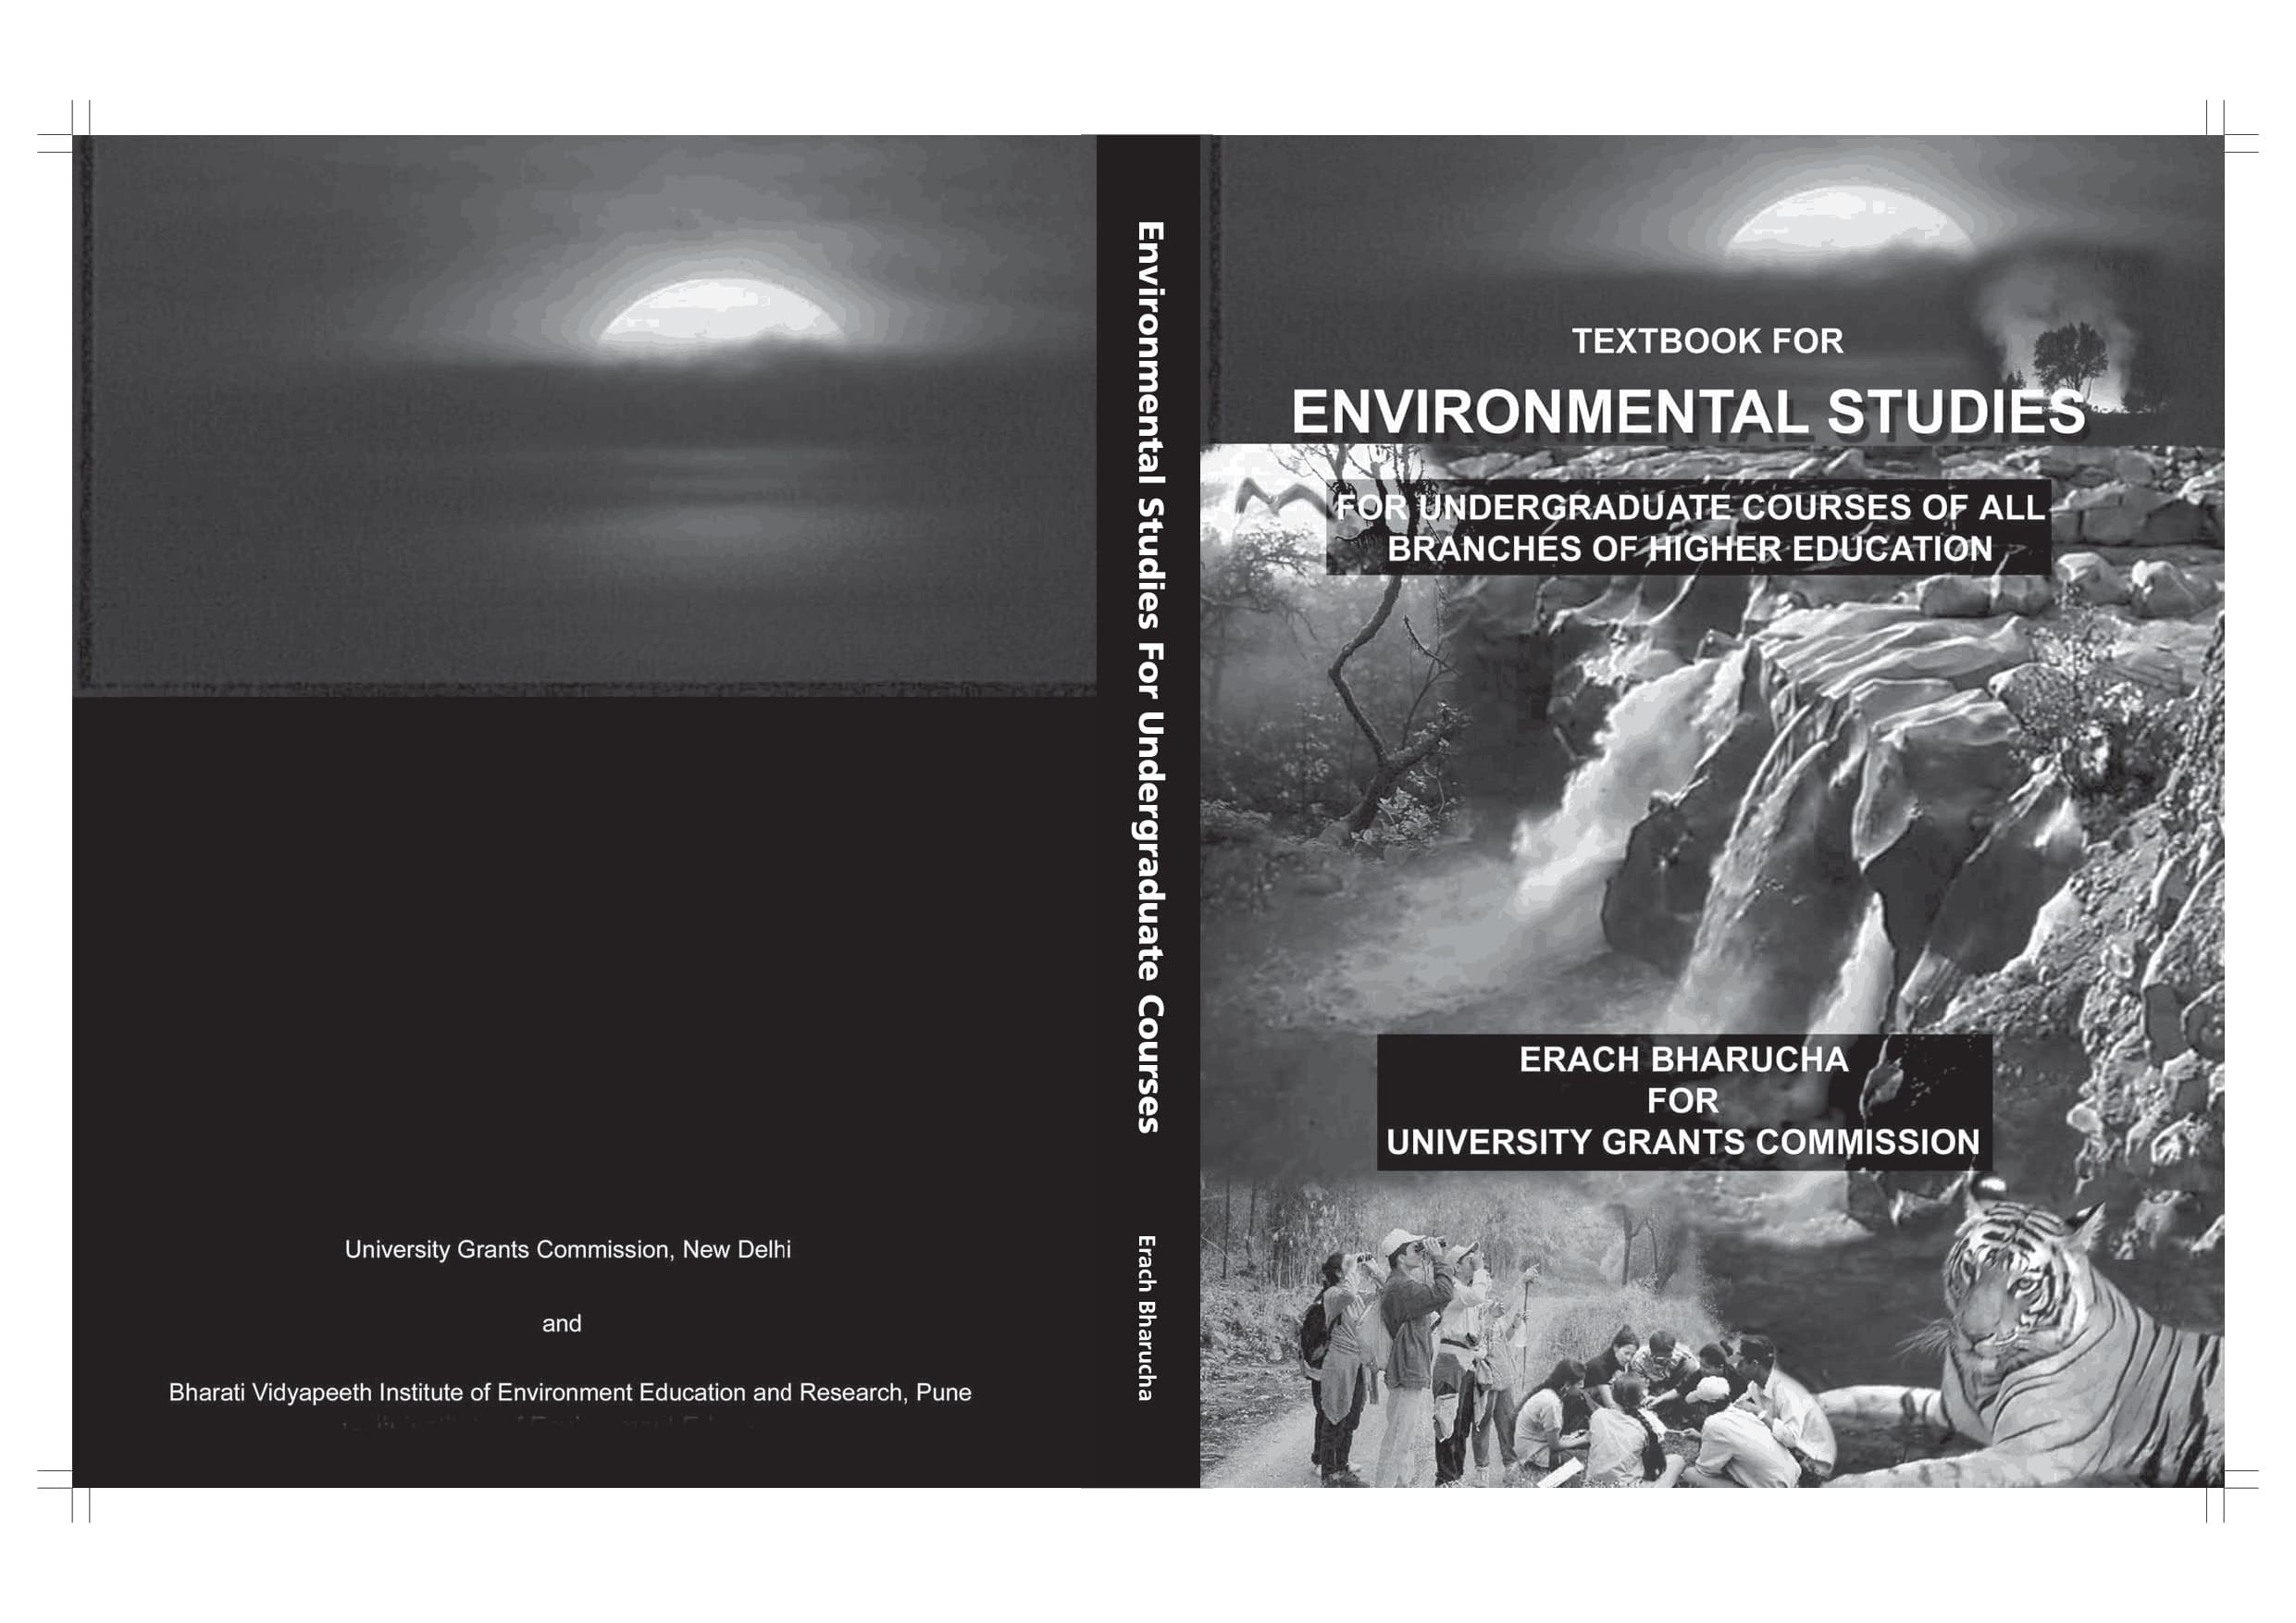 ENVIRONMENTAL STUDIES FOR UNDER GRADUATE COURSES OF ALL BRANCHES OF HIGHER EDUCATION